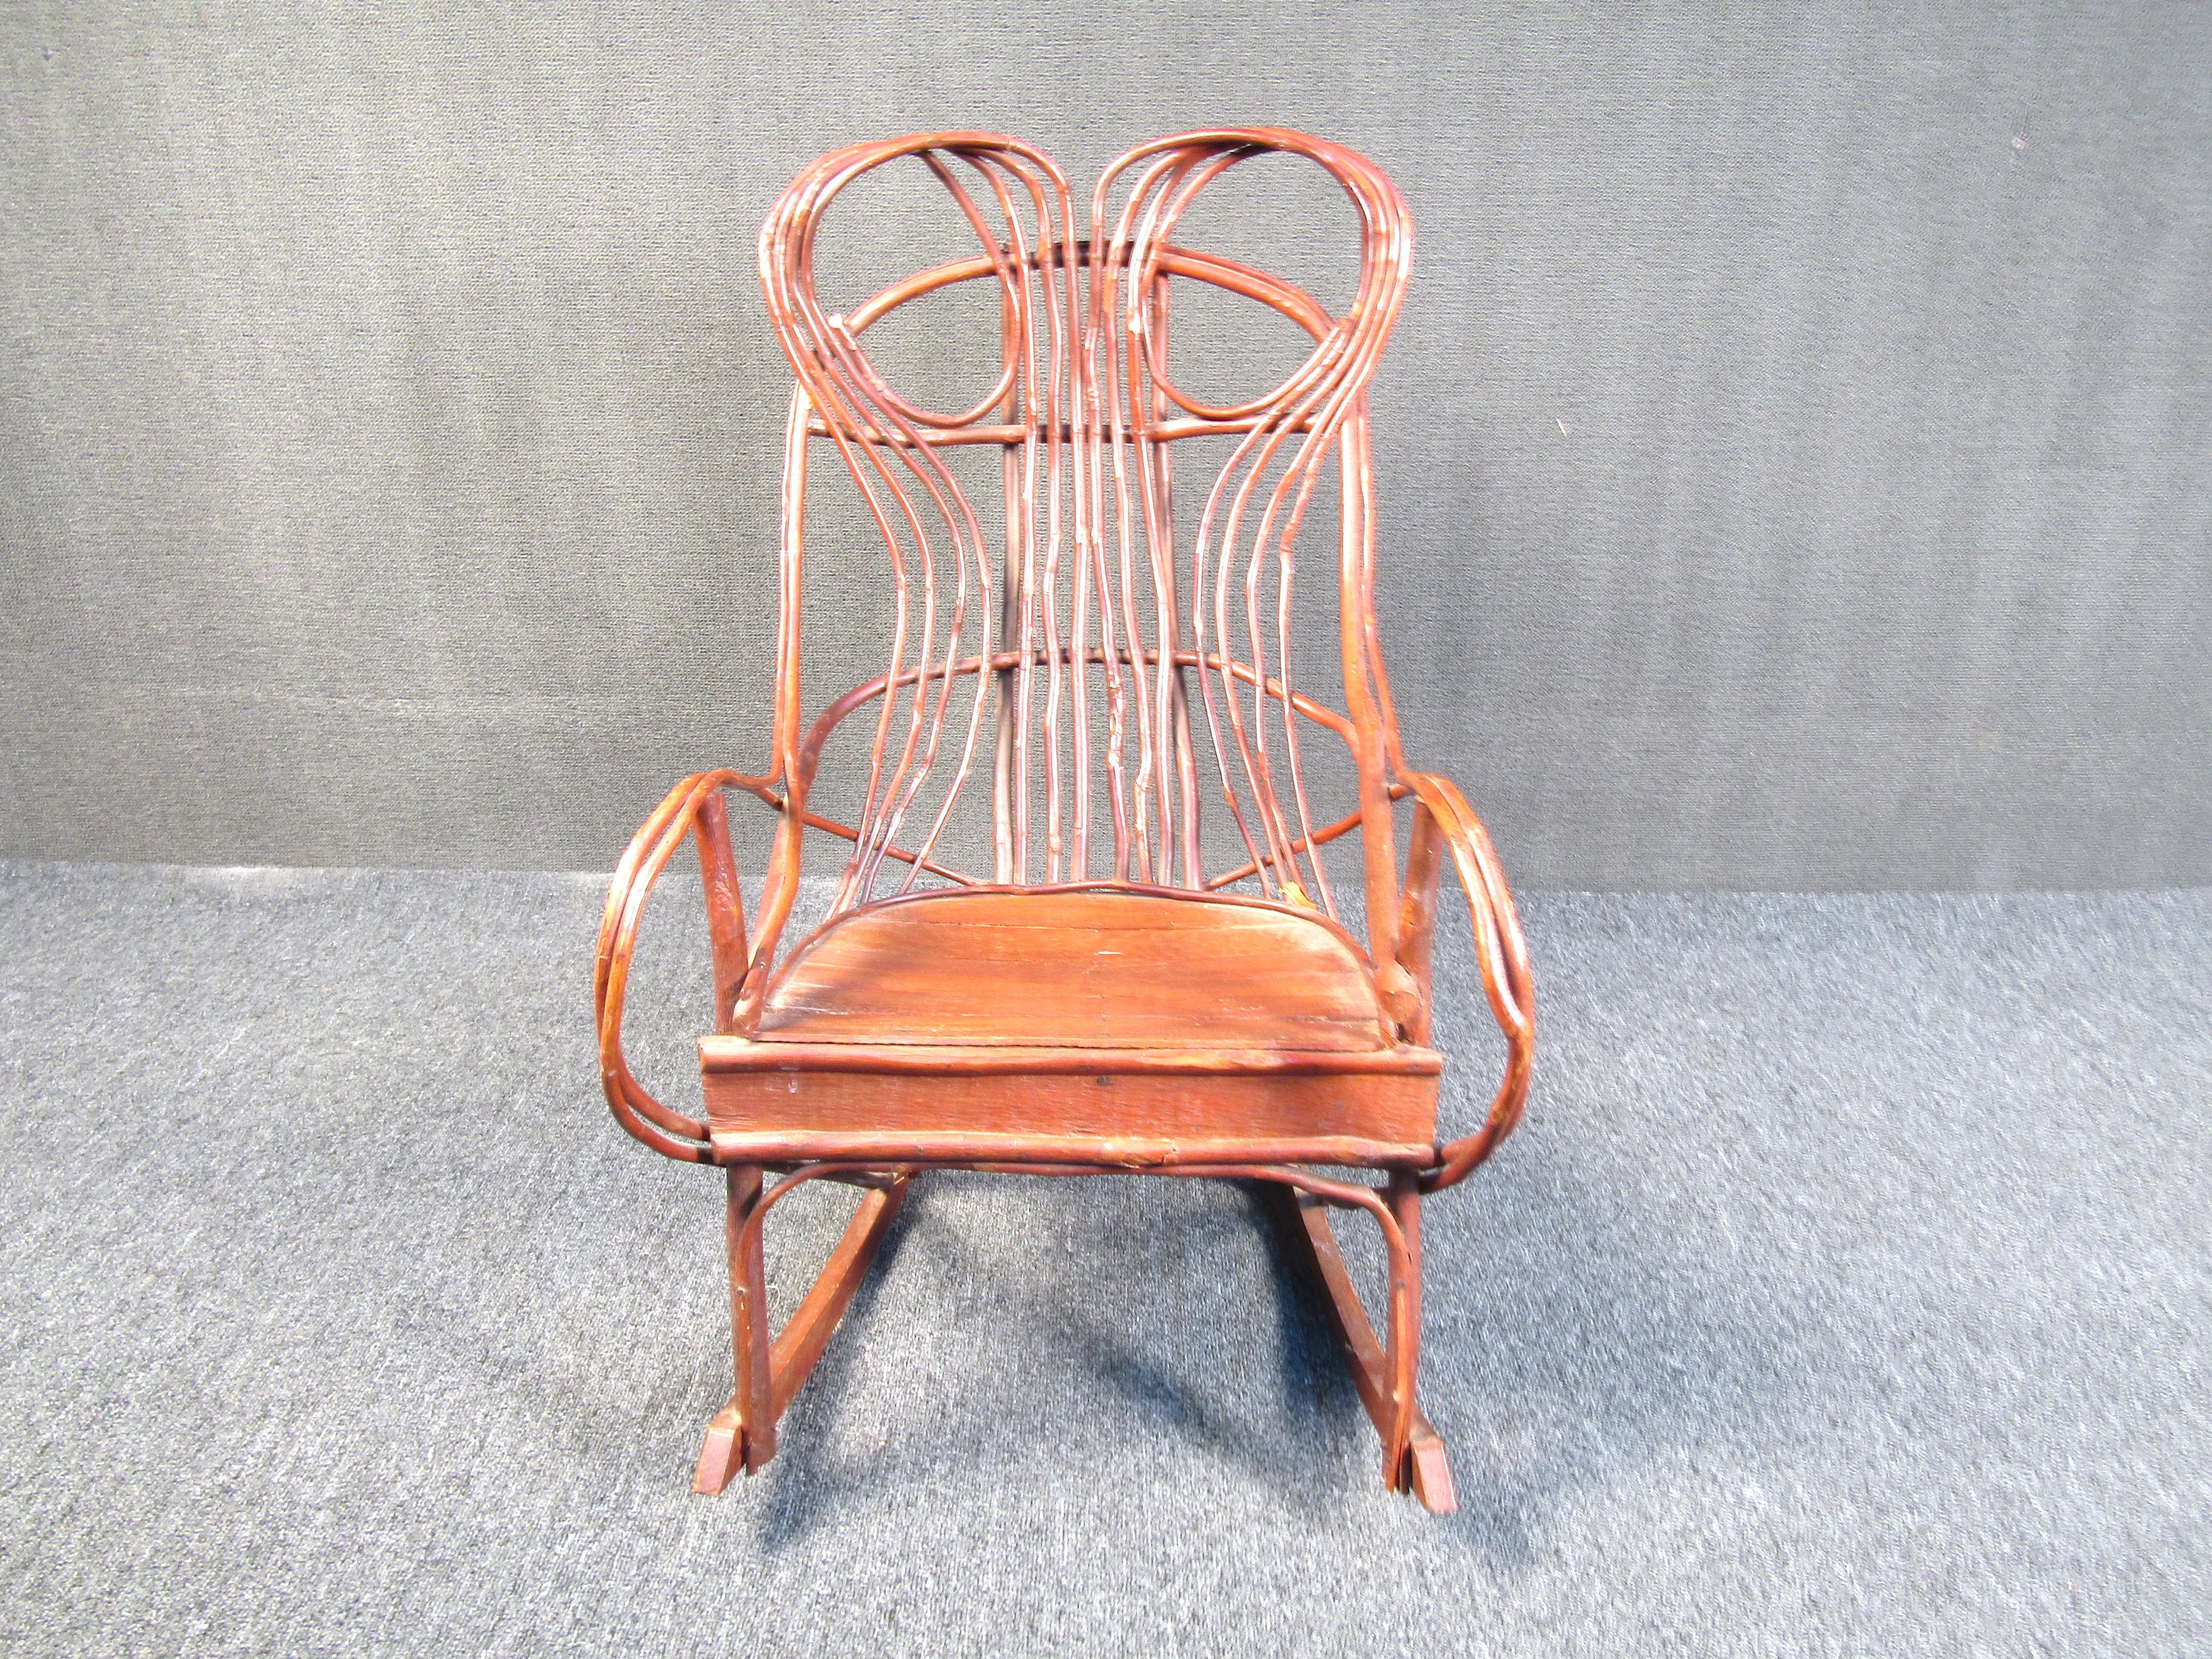 This incredibly unique rocking chair is made from intricately woven and fastened tree branches. it has a flat wood seat with the rest of the piece being made from actual non processed tree branches. This piece will add character and charm to any